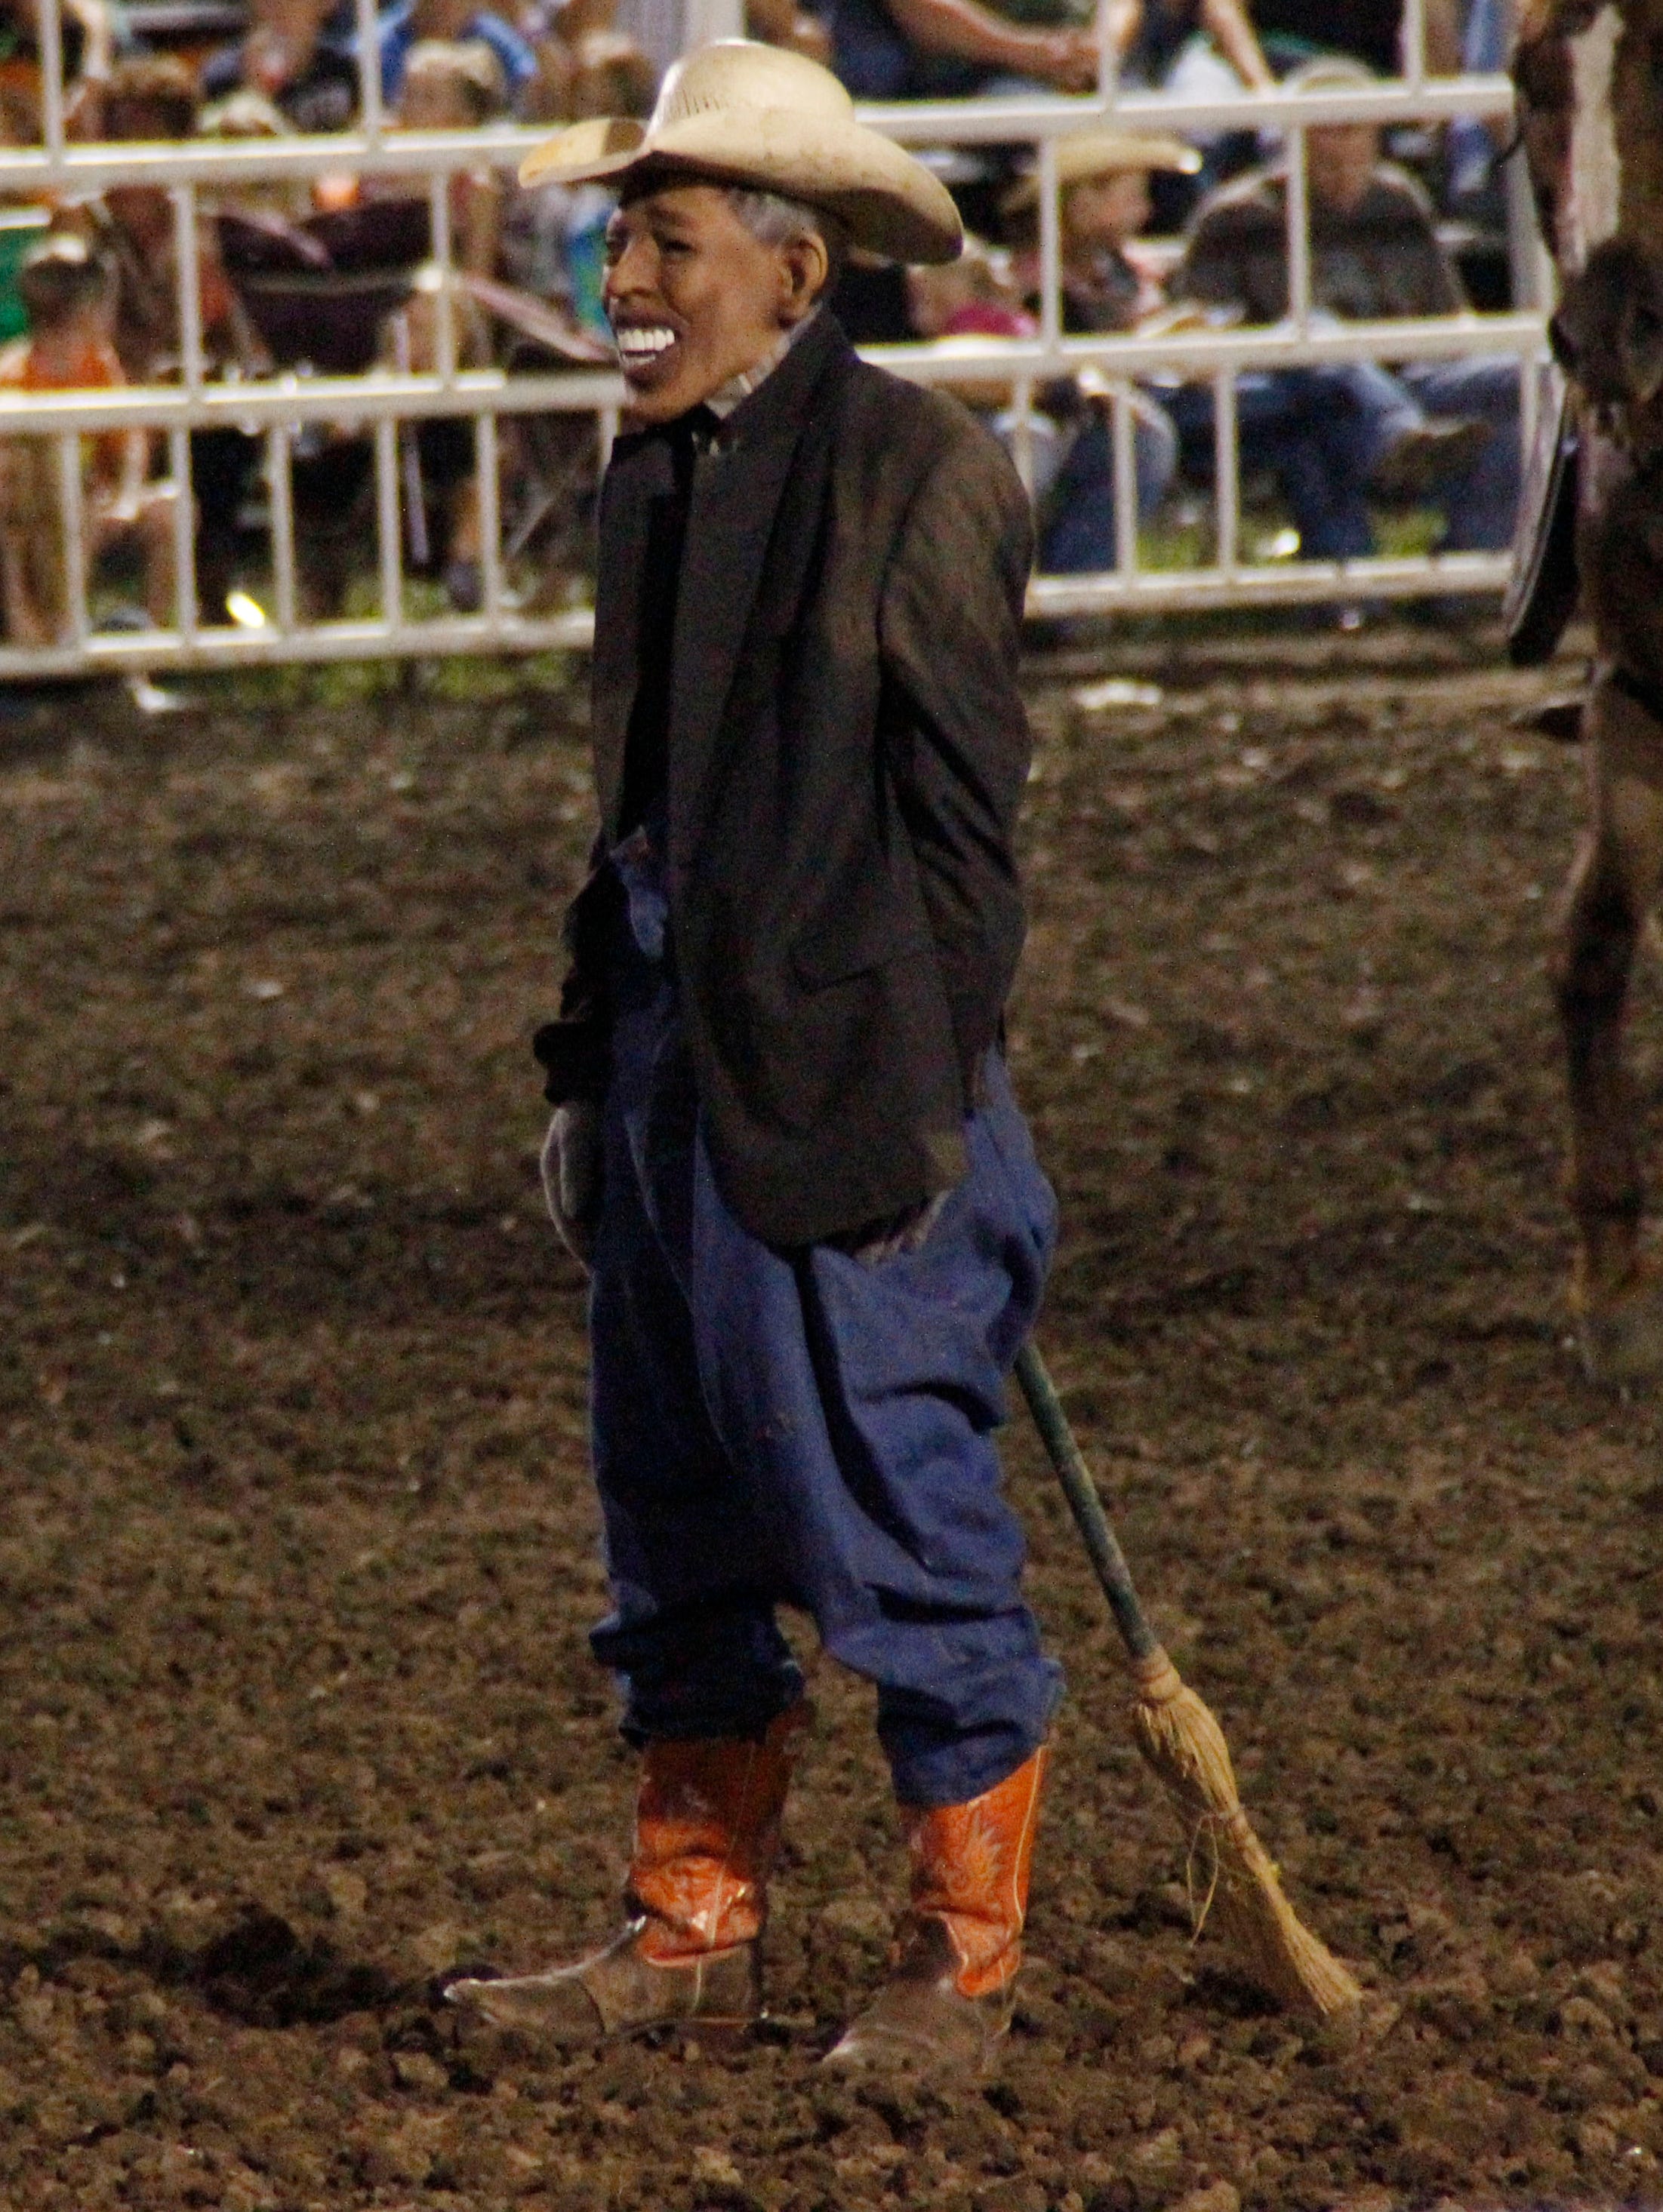 Funny: Rodeo clown draws praise for Obama mask, but not from lowlifes 1376270972000-obamamask